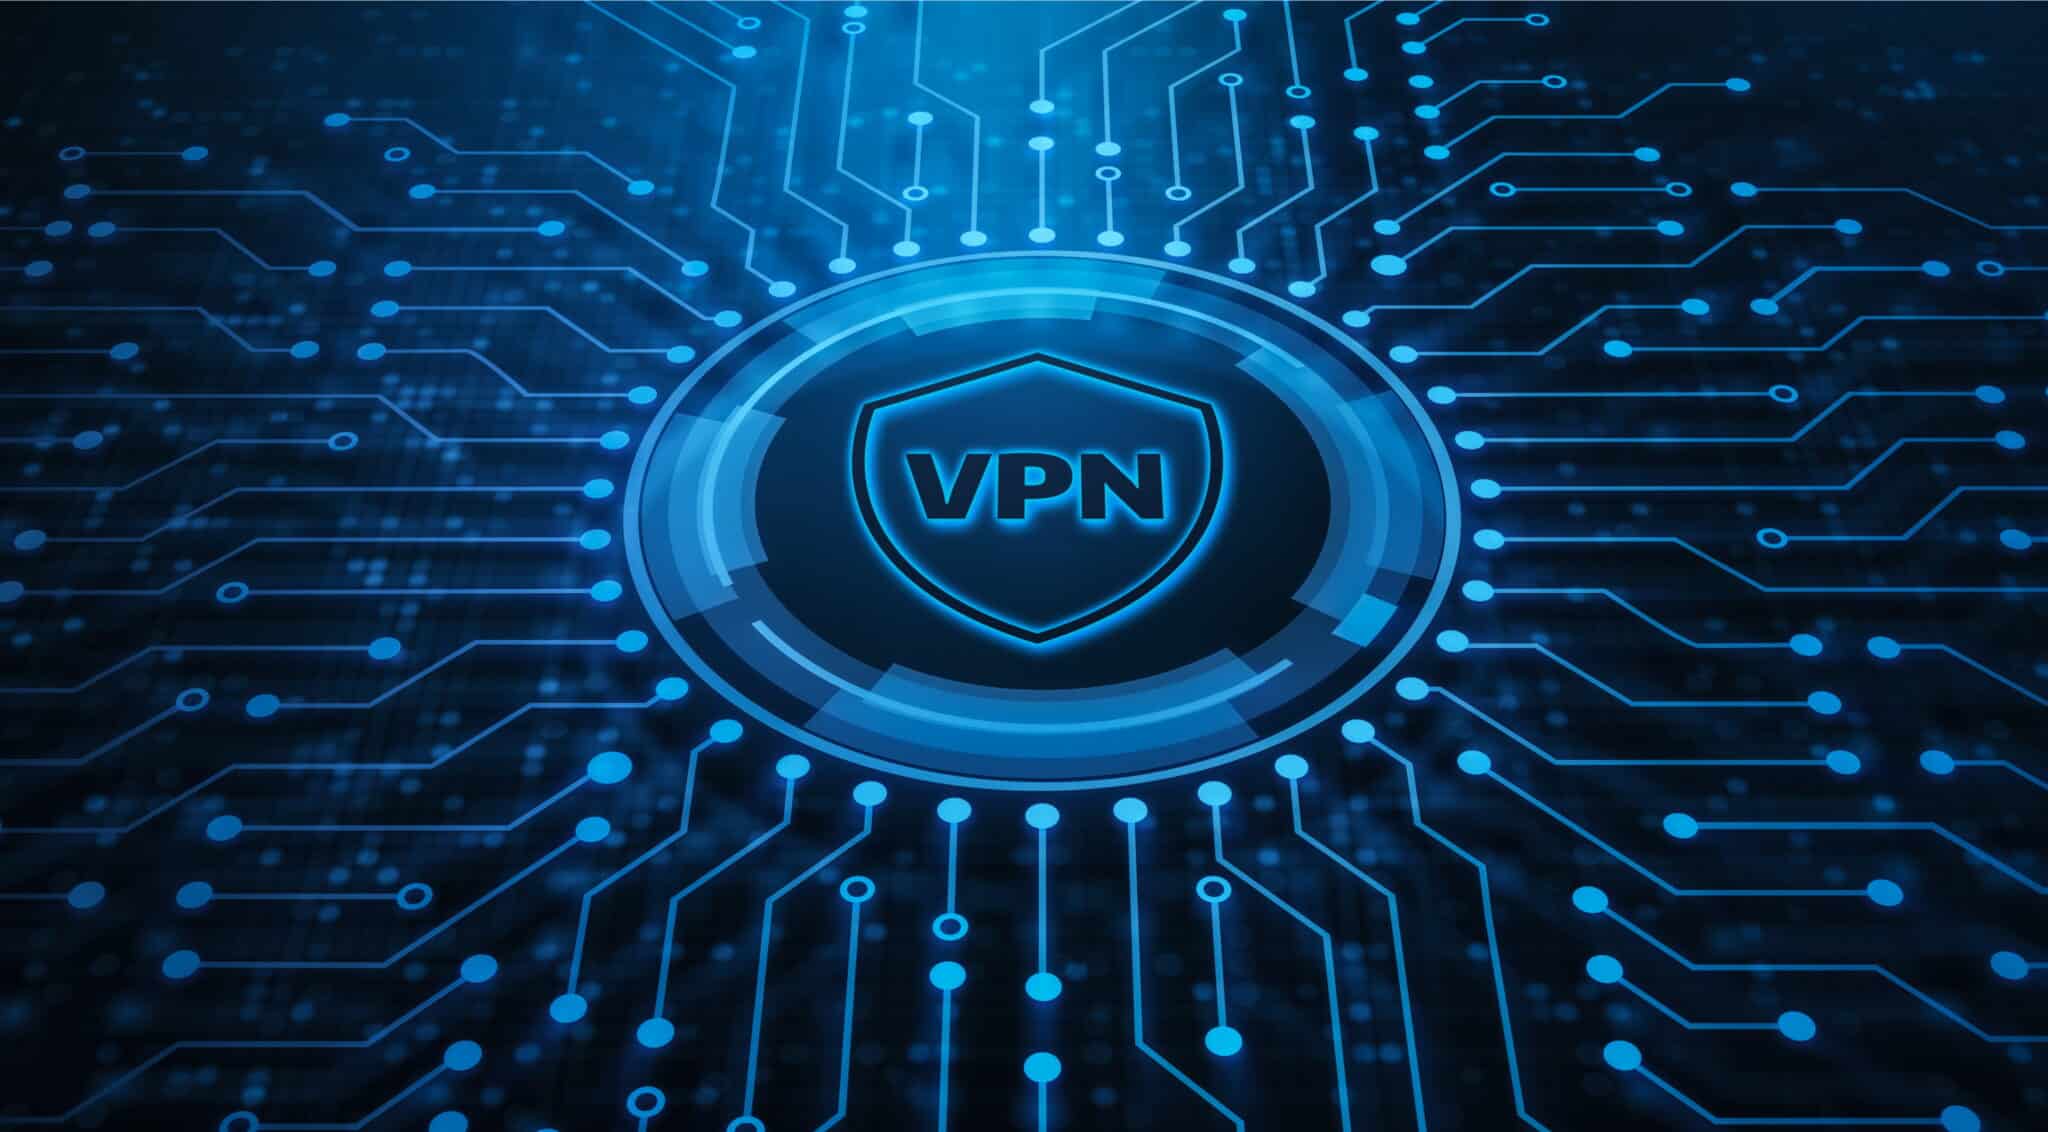  Watch the live stream from abroad with a VPN